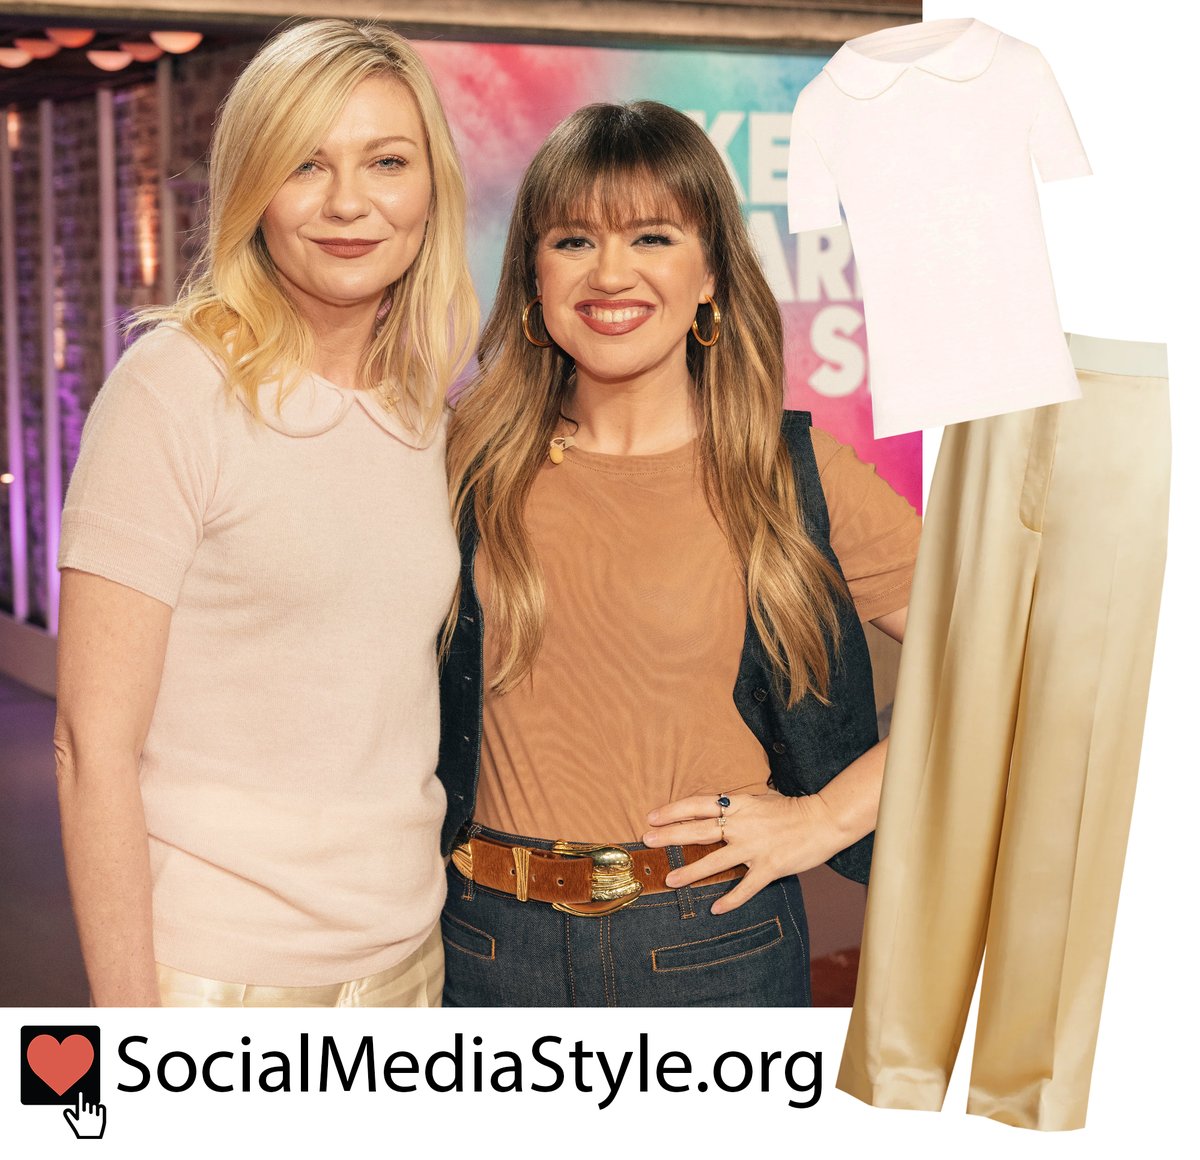 Find out where you can buy Kirsten Dunst's light pink Peter Pan collar top and champagne wide leg pants from from The Kelly Clarkson Show here: socialmediastyle.org/post/kirsten-d…
#KirstenDunst #KellyClarksonShow #Khaite #widelegpants #peterpancollar #MaisonMargiela